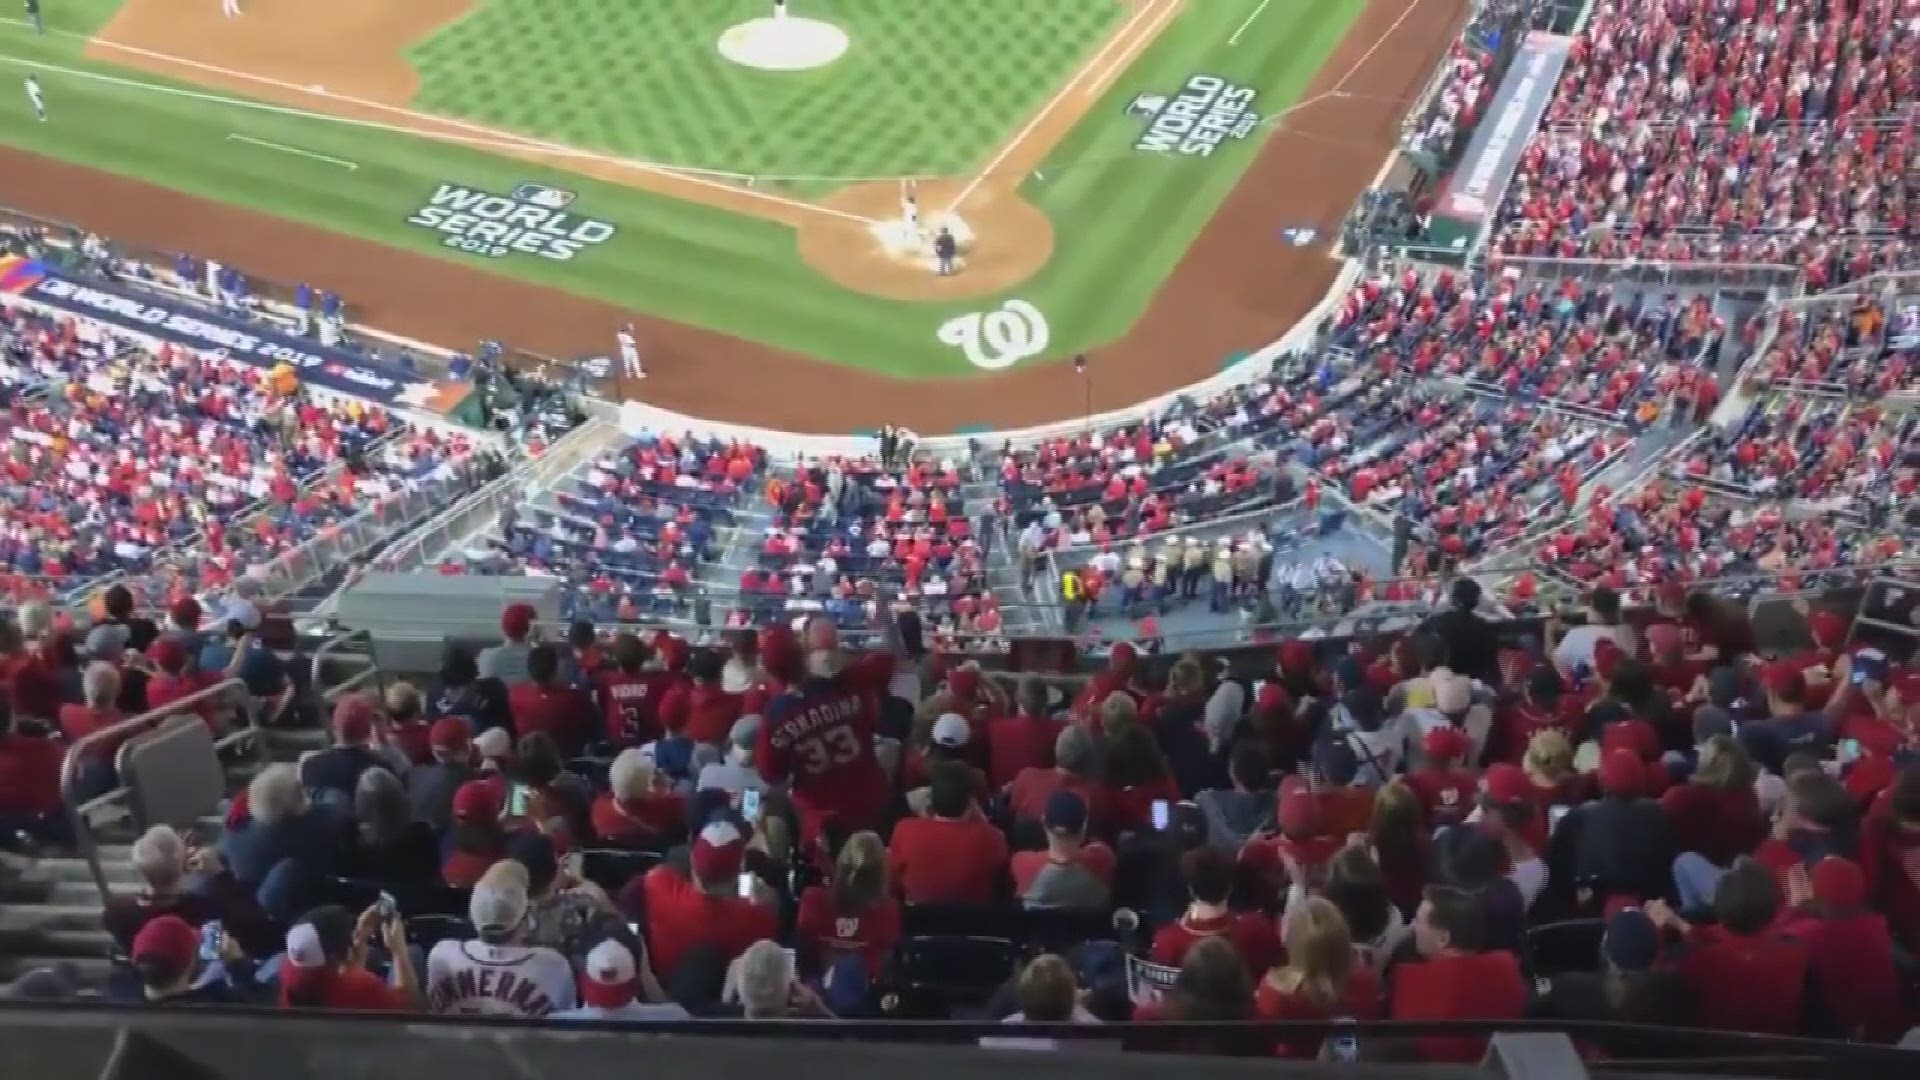 President Trump attended Game 5 of the World Series on Sunday. The crown at Nationals Park erupted in chants, yelling "lock him up!"